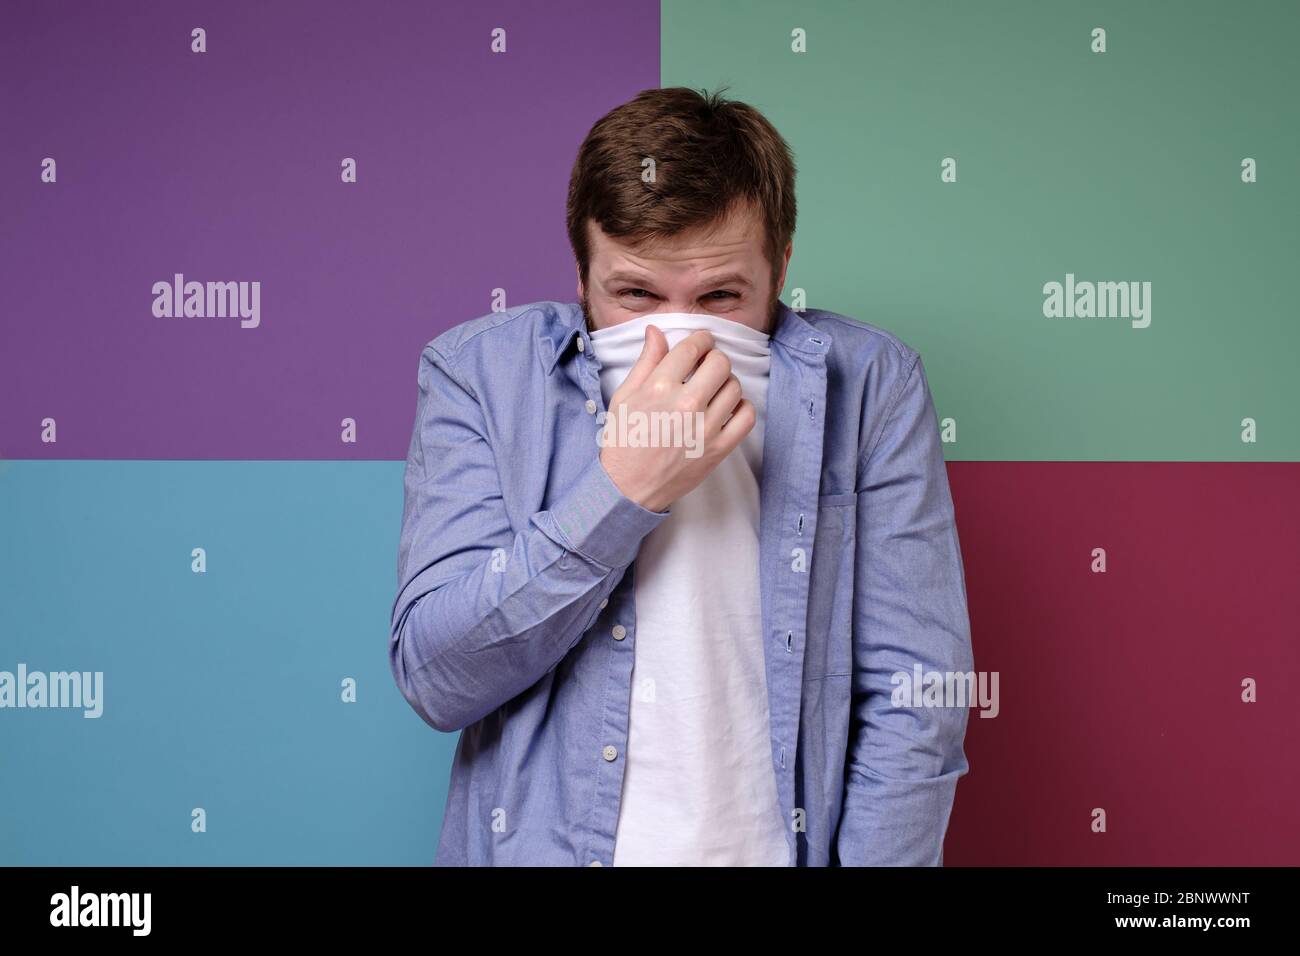 Man feels a fetid odor, he covered his nose with a t-shirt, squinted eyes in displeasure, and squeezed his shoulders. Stock Photo